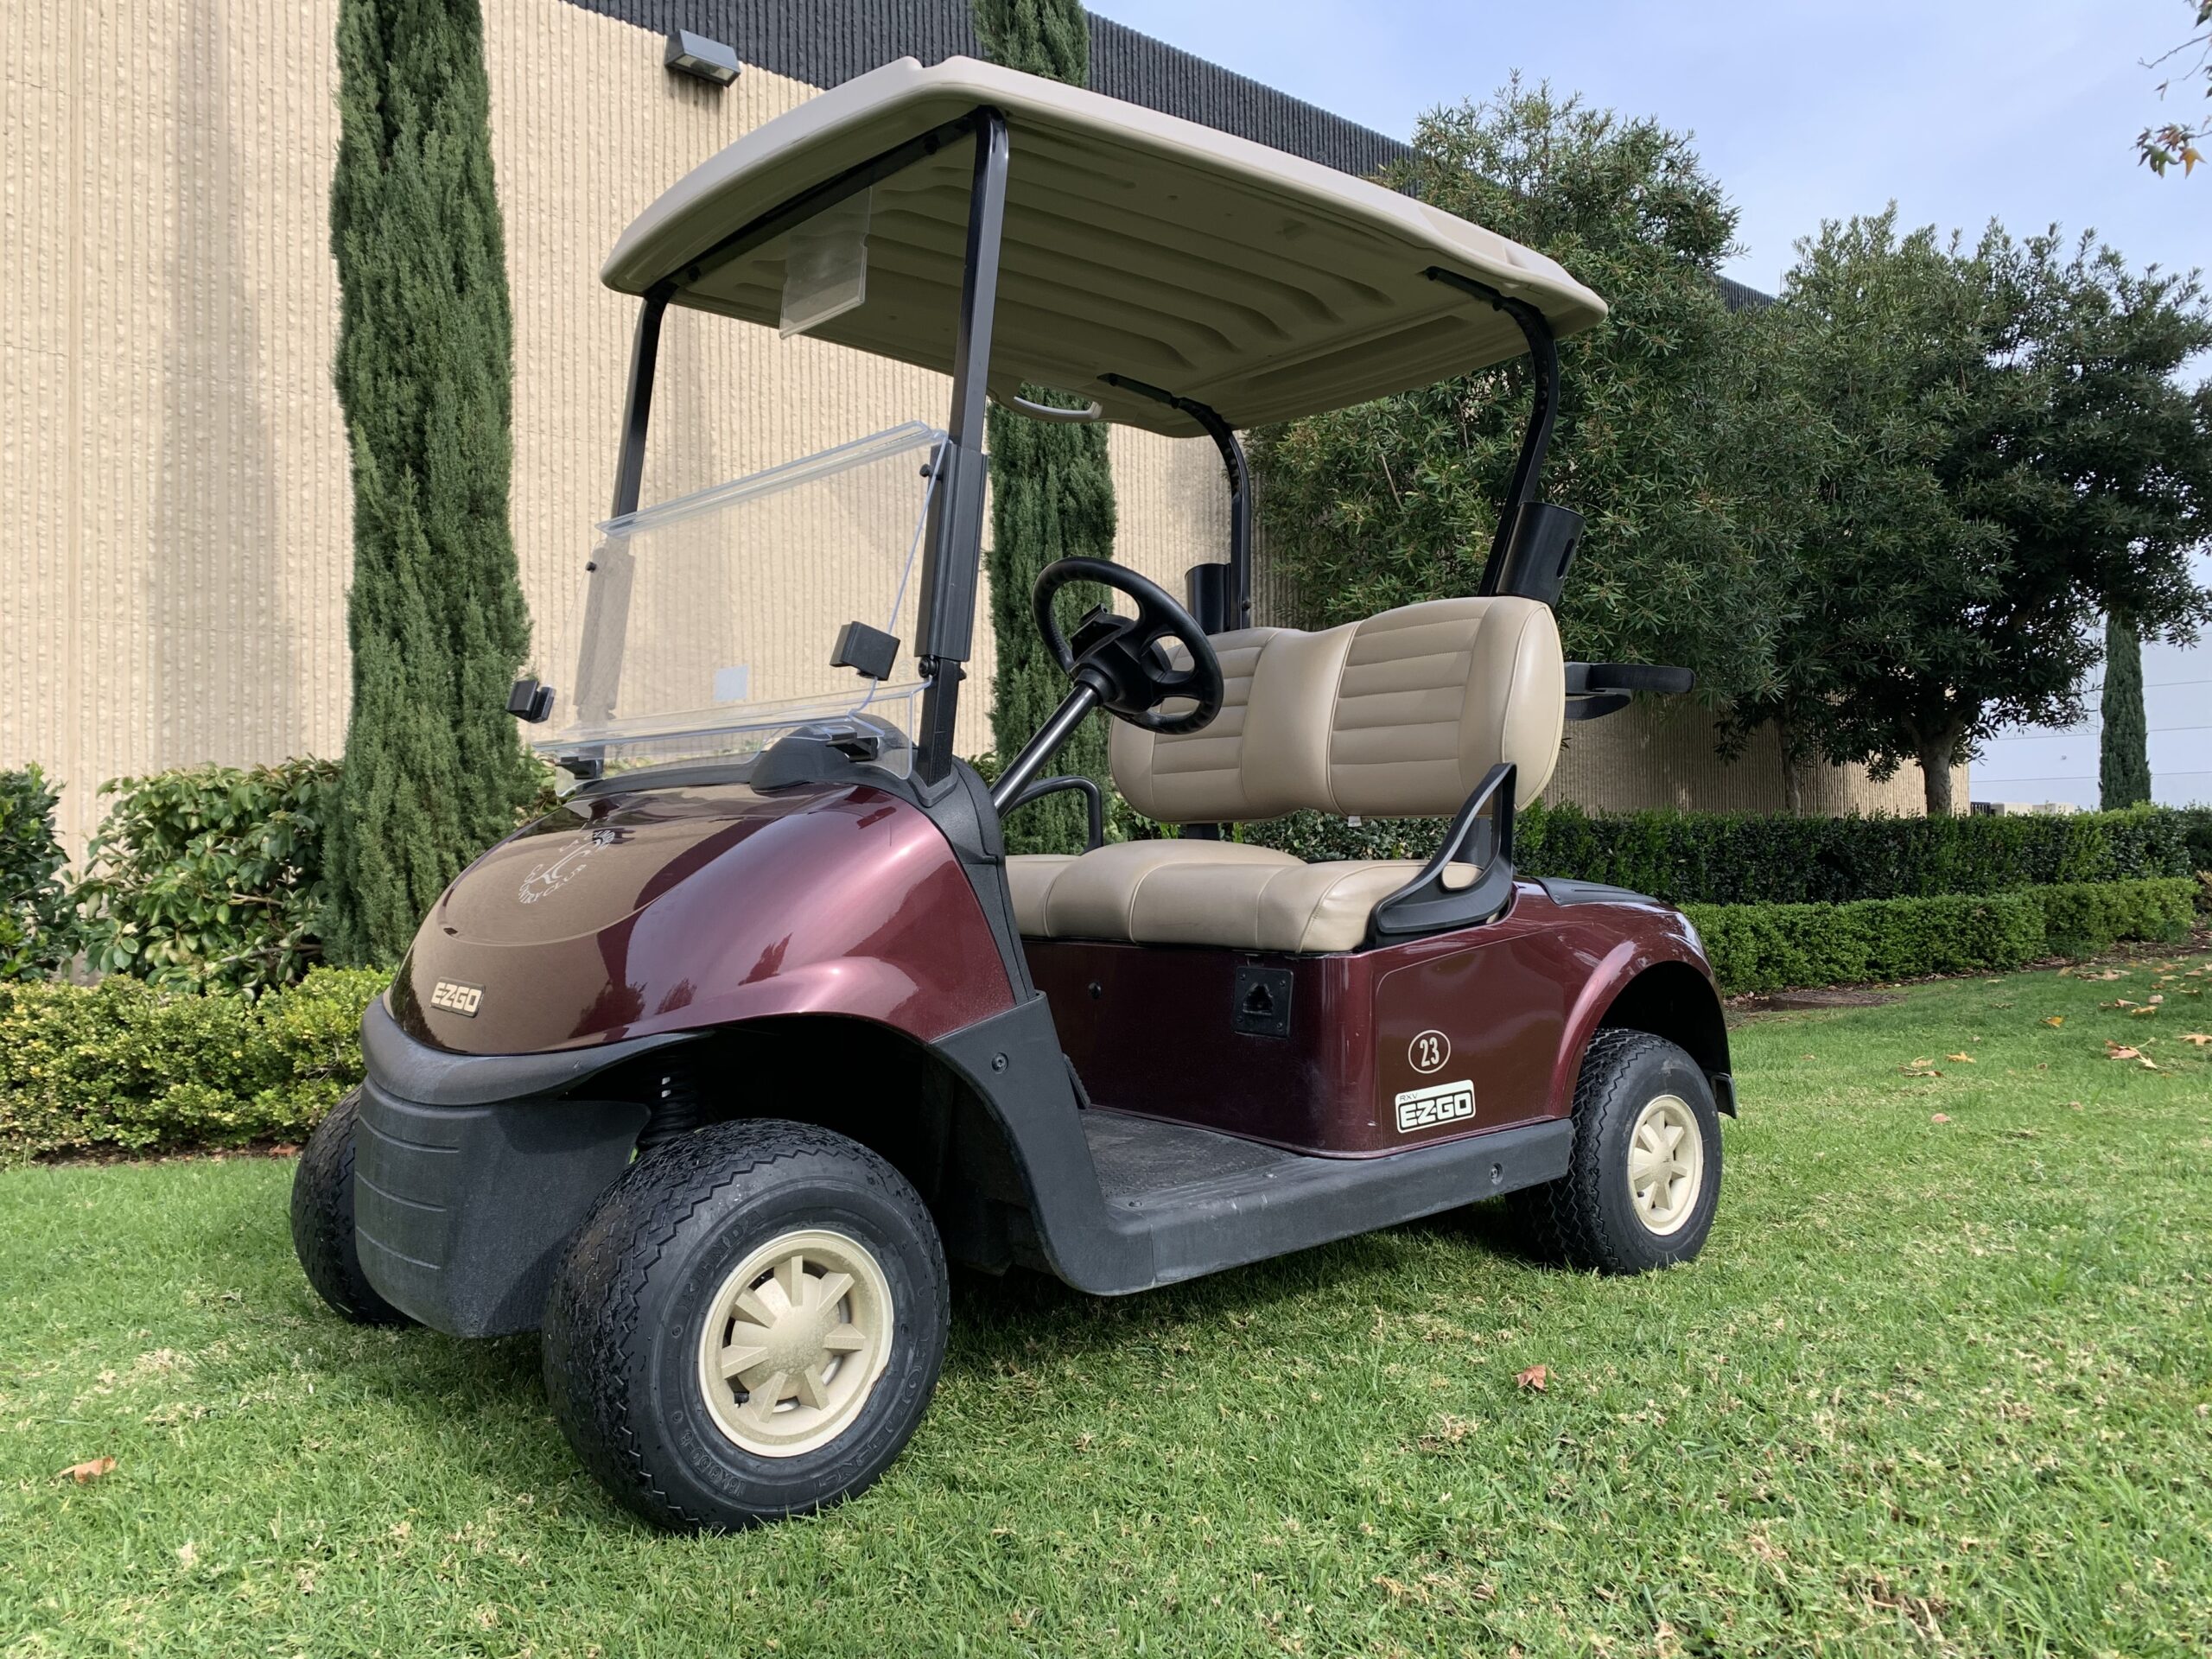 Ezgo Rxv 2 Passenger Golf Cart Straight Off The Course, #A7